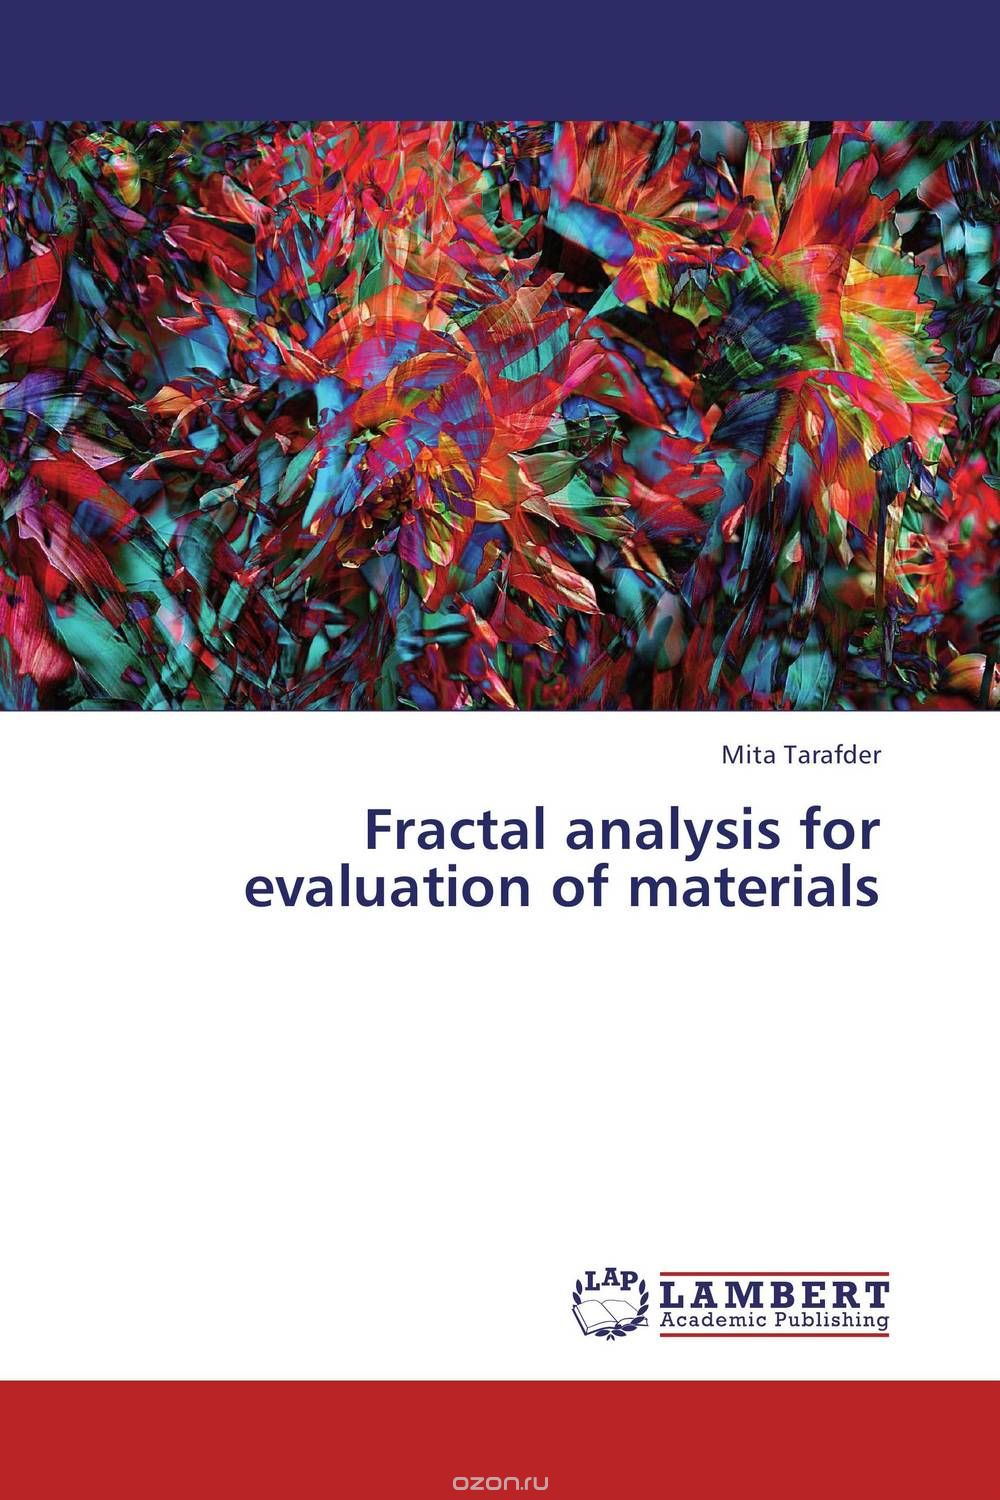 Fractal analysis for evaluation of materials